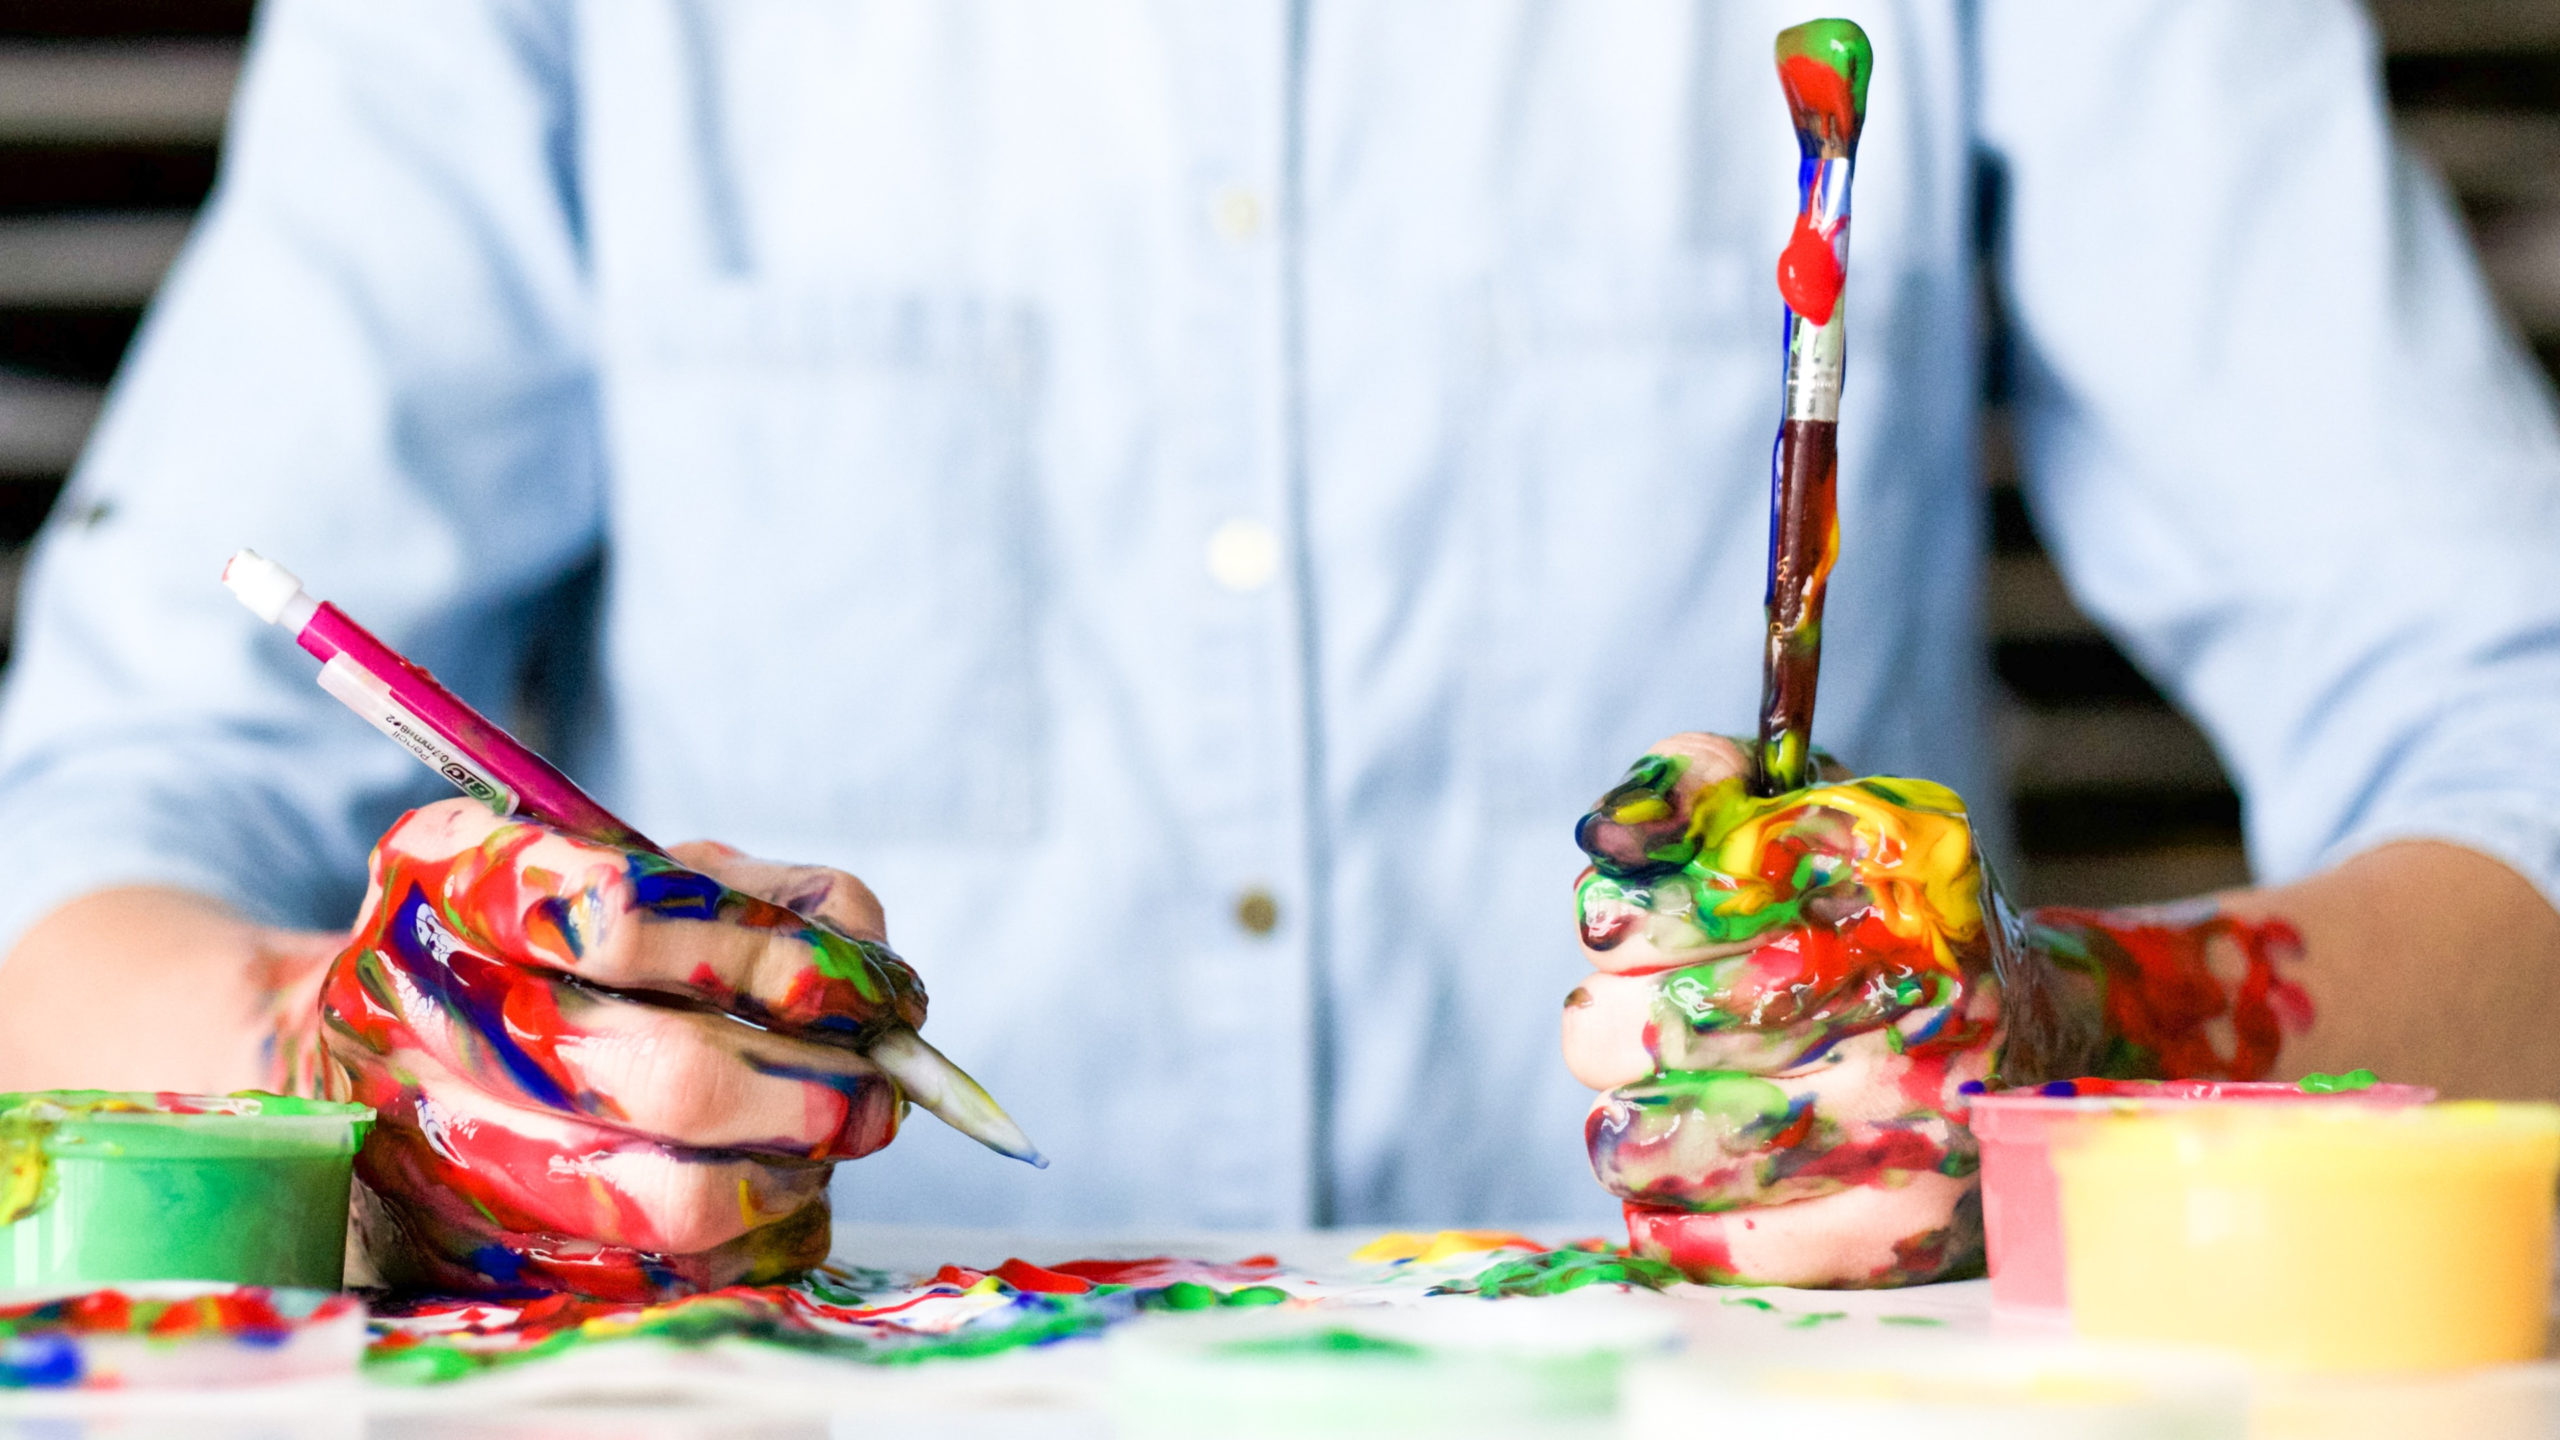 Person with paint covering his hands while holding pencil and paintbrush, paint gives off odors which are volitile organic compounds